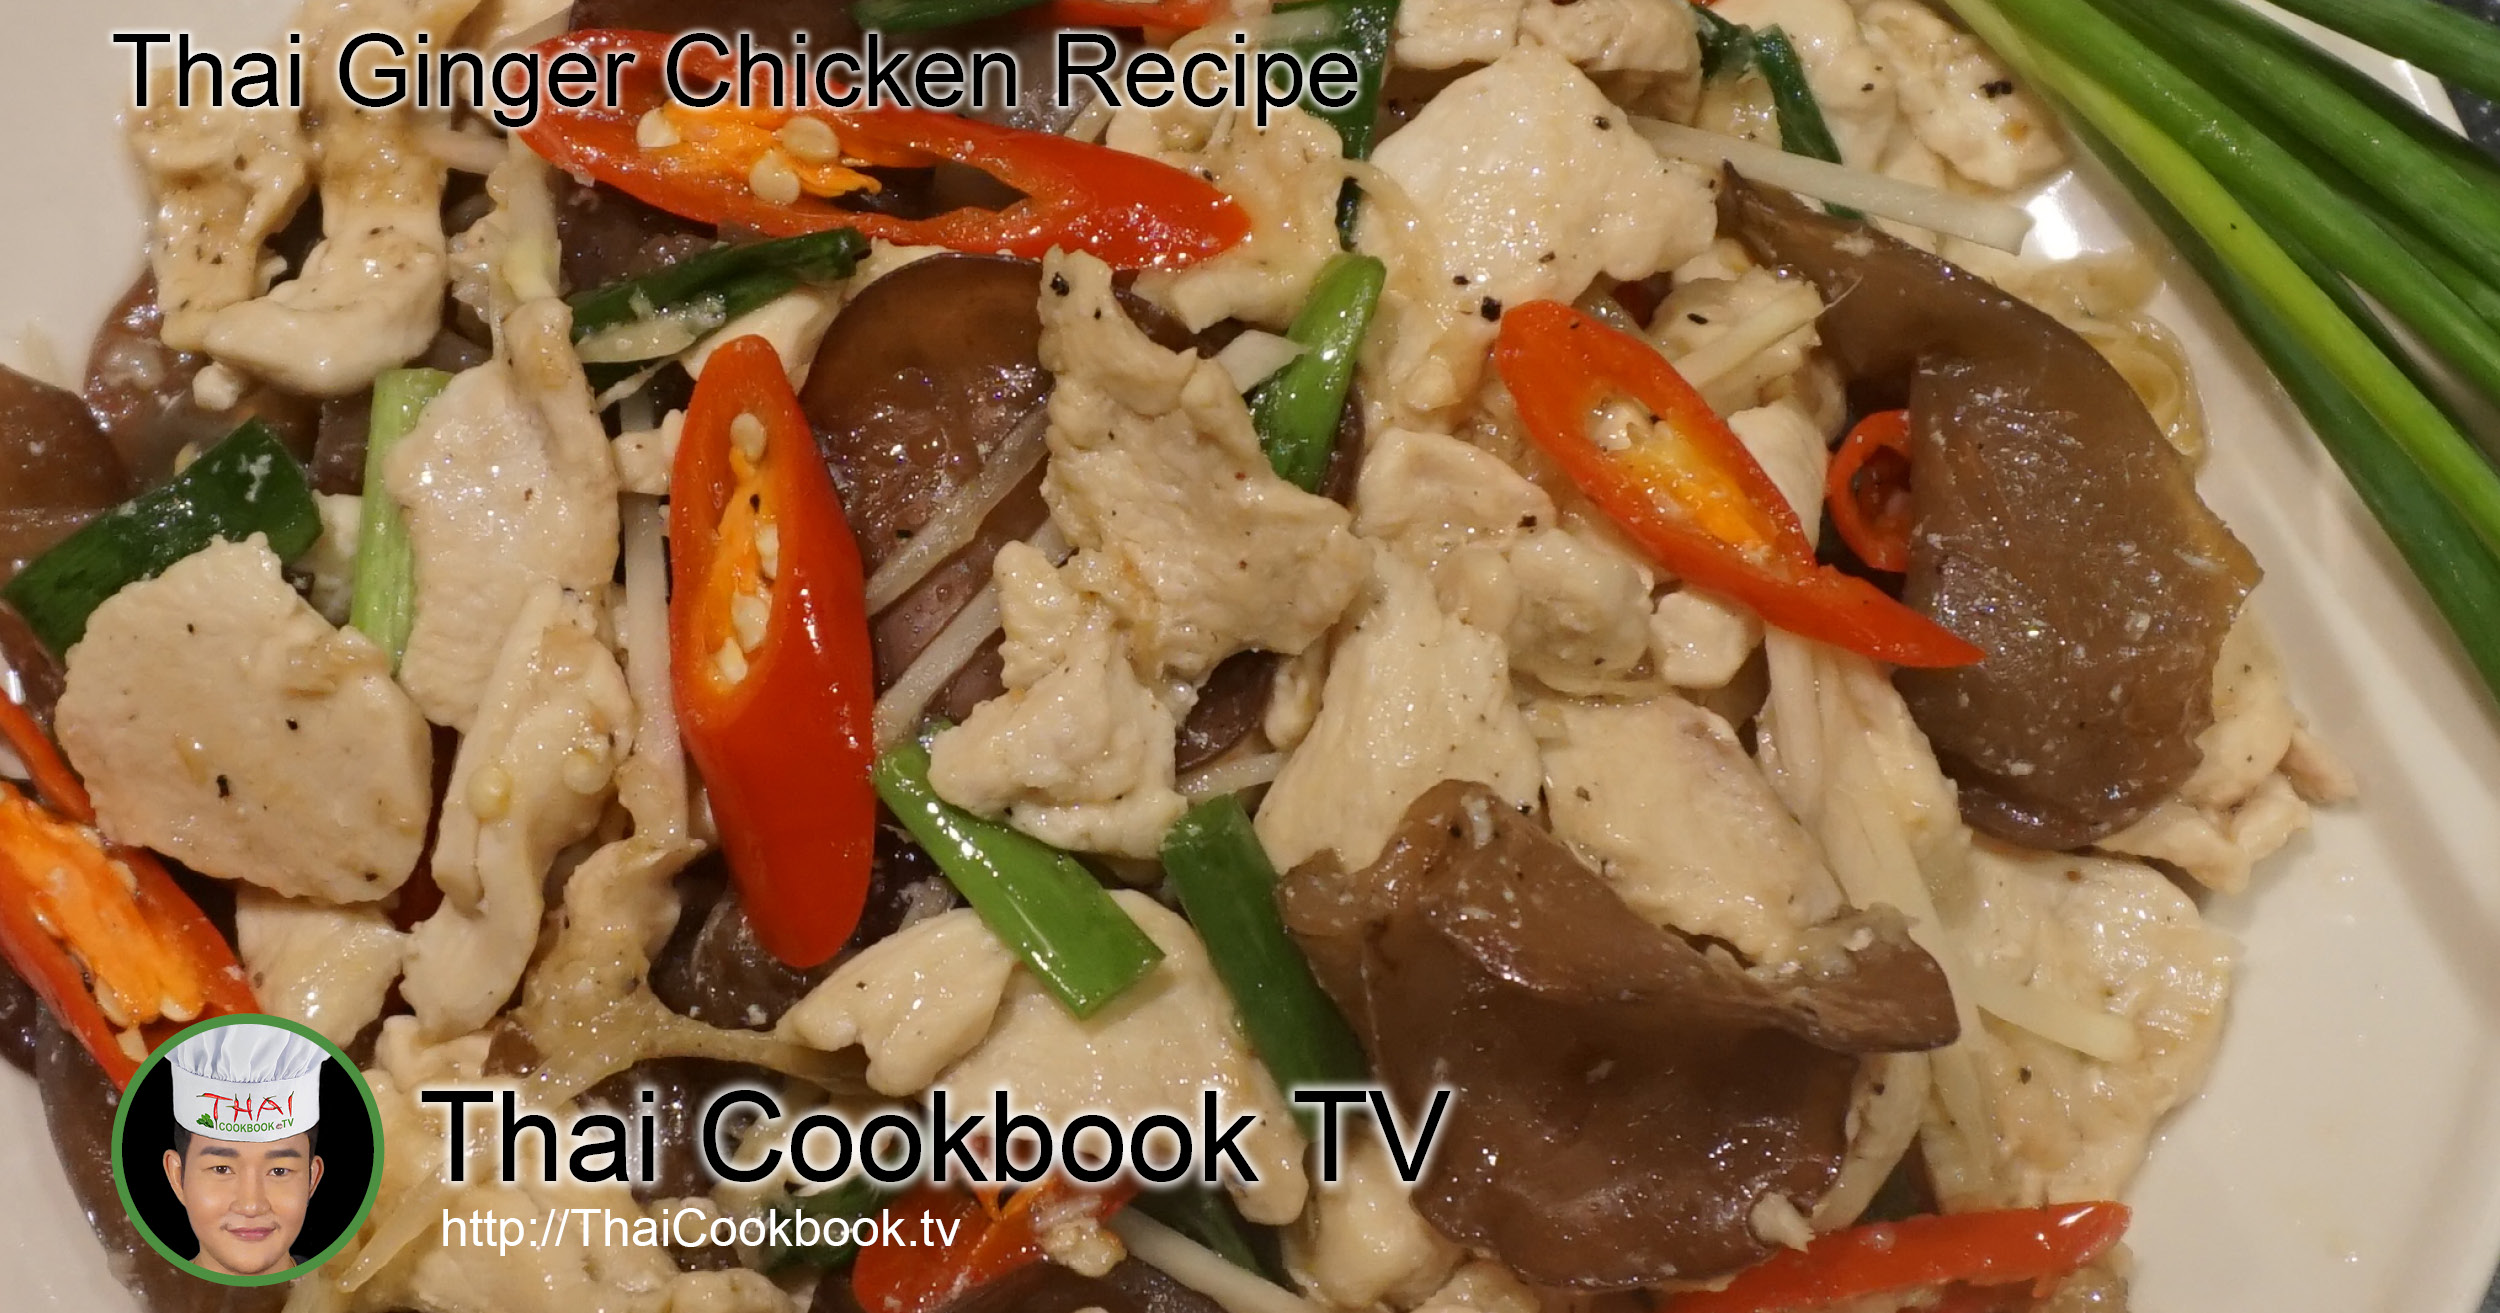 Authentic Thai Recipe for Ginger Chicken